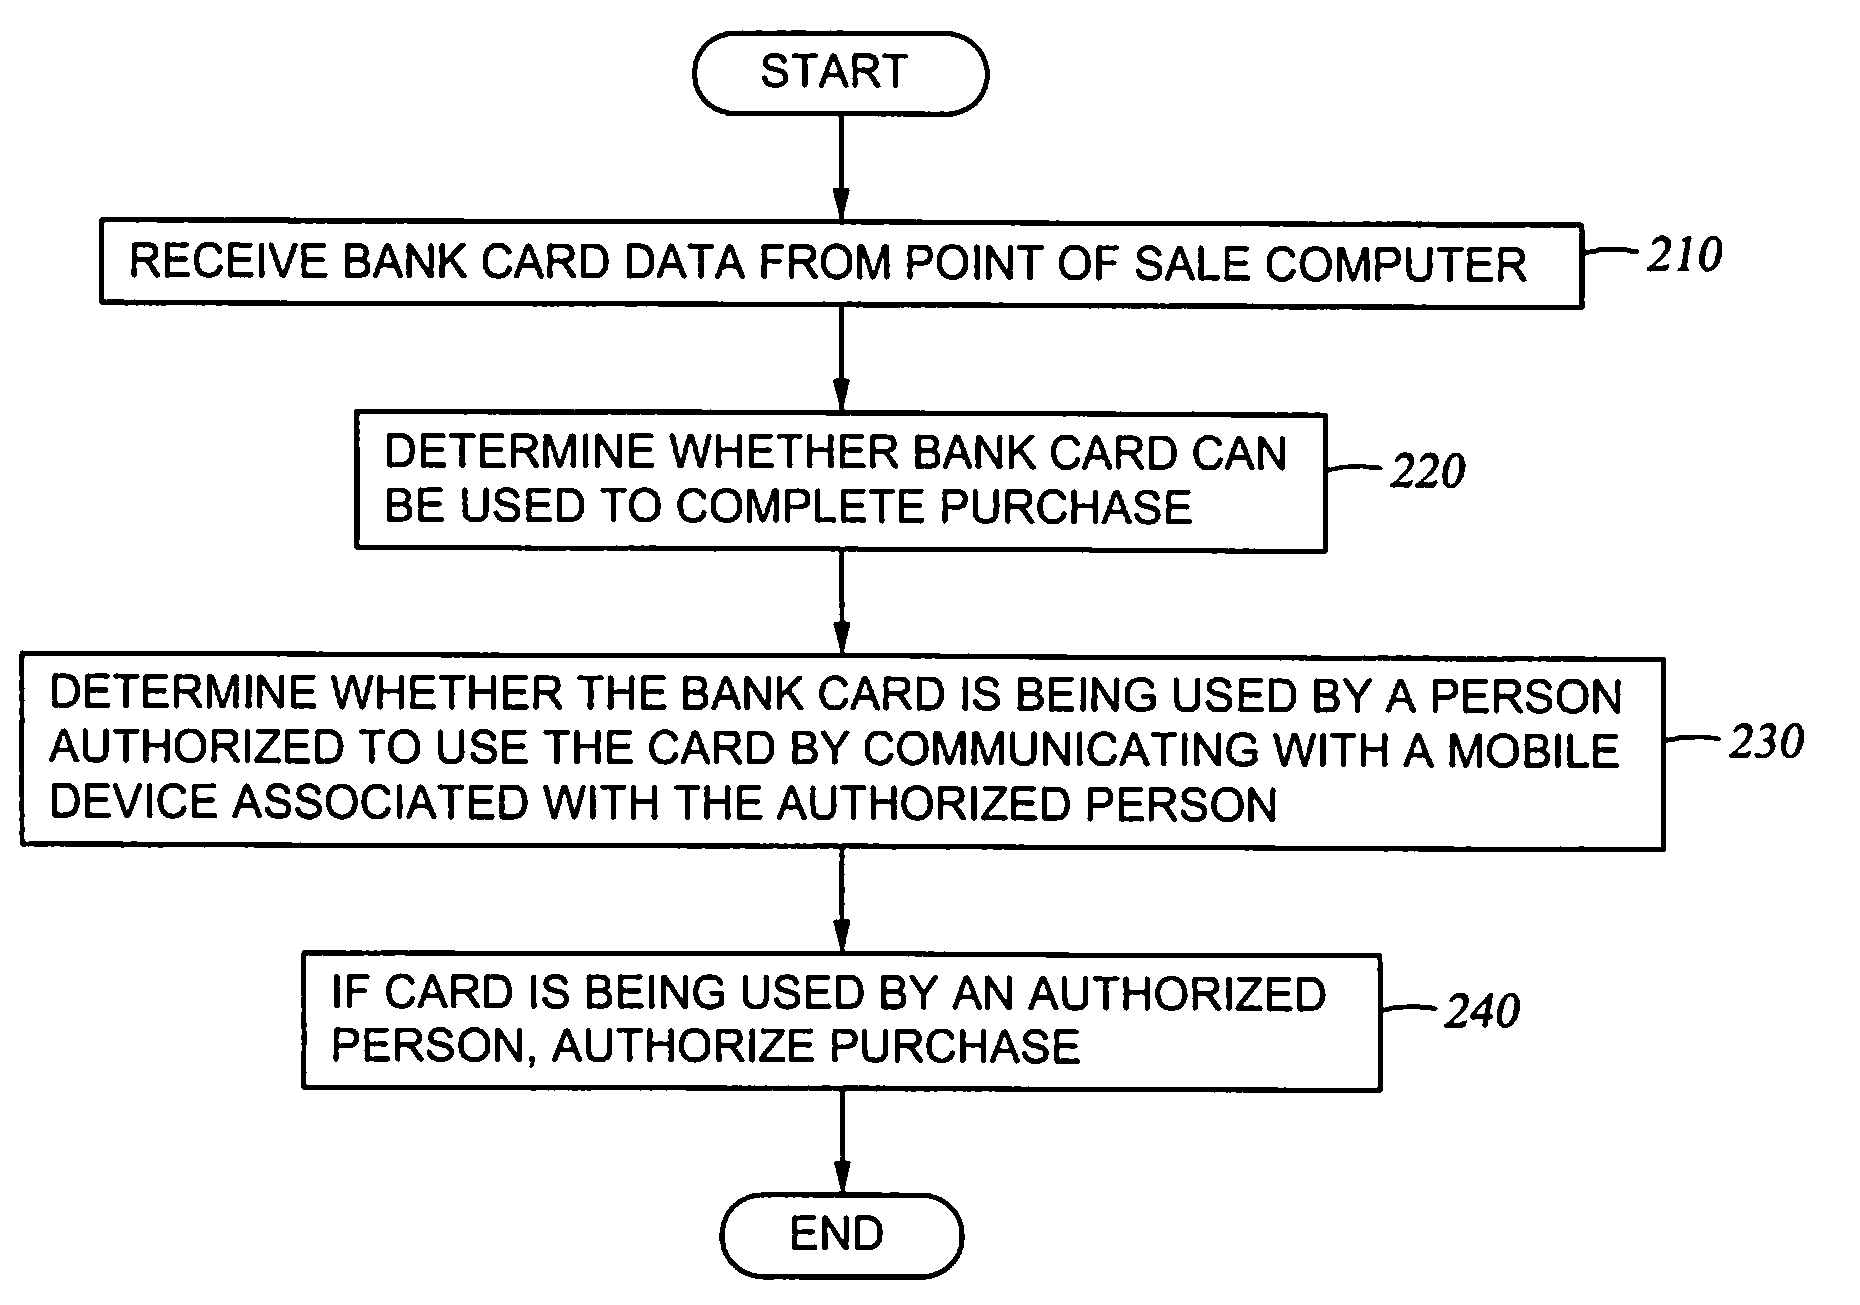 Real-time security verification for banking cards